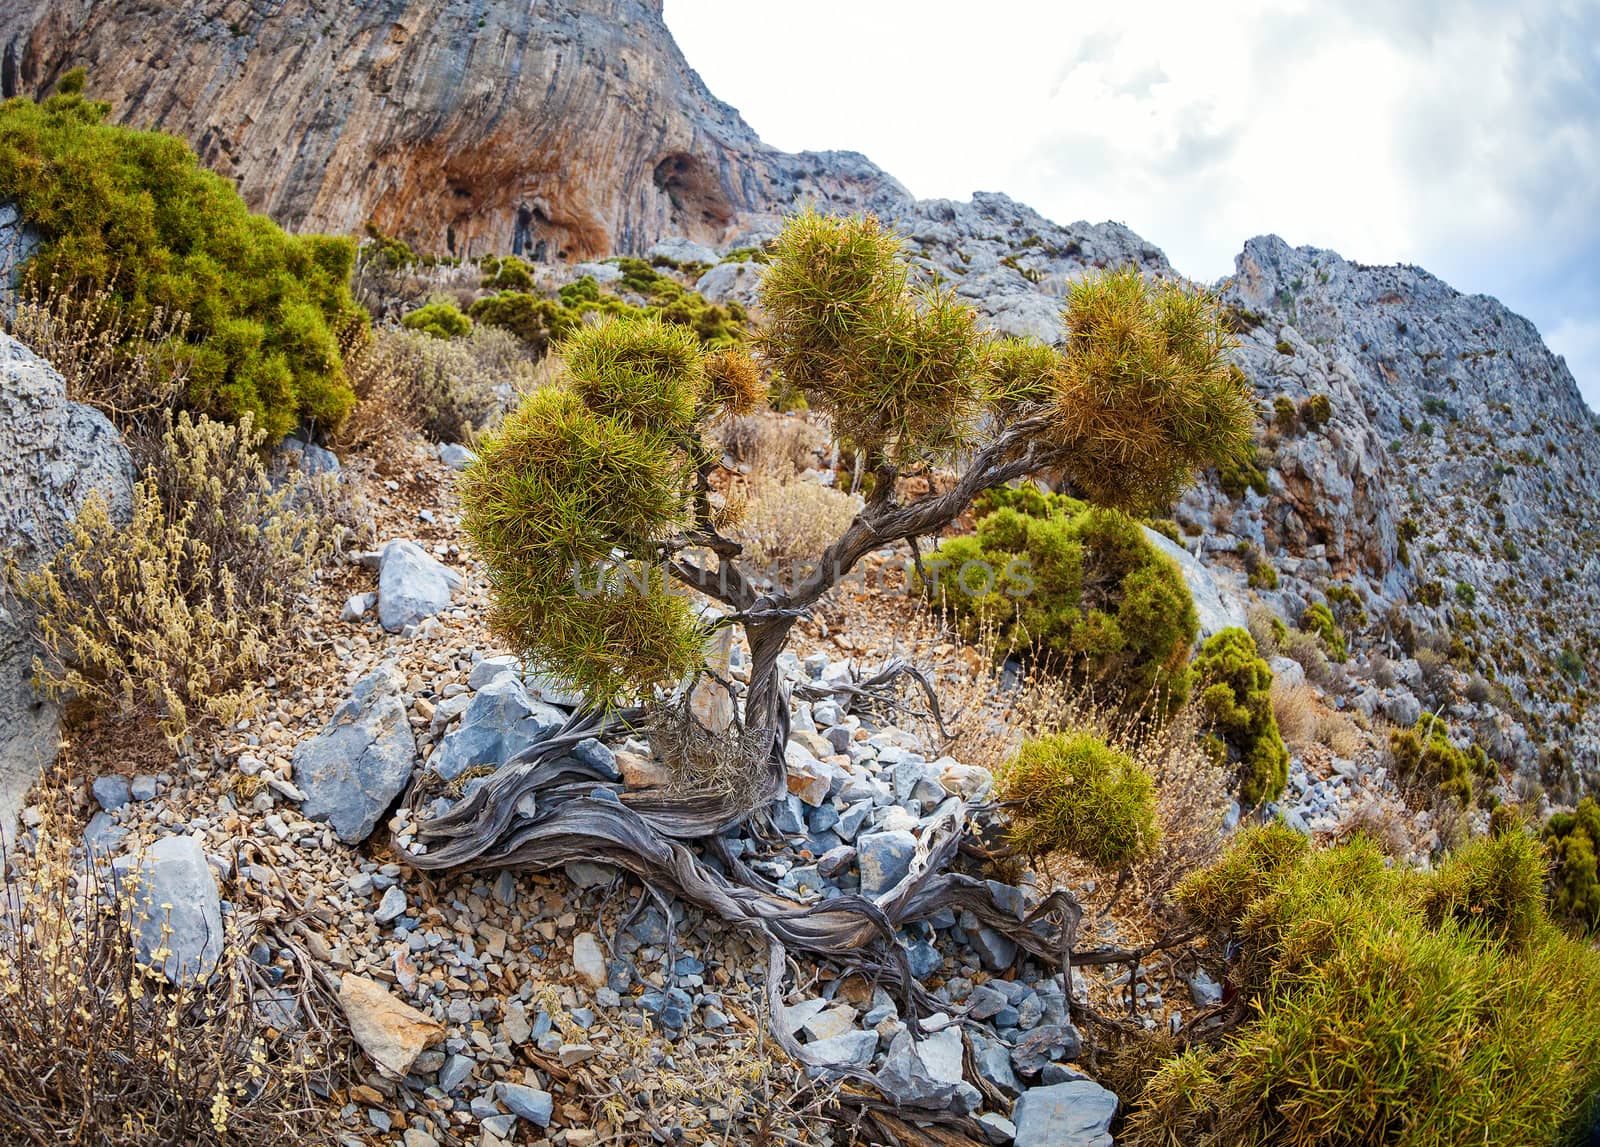 Vegetation on rocky slope in mountains by photobac